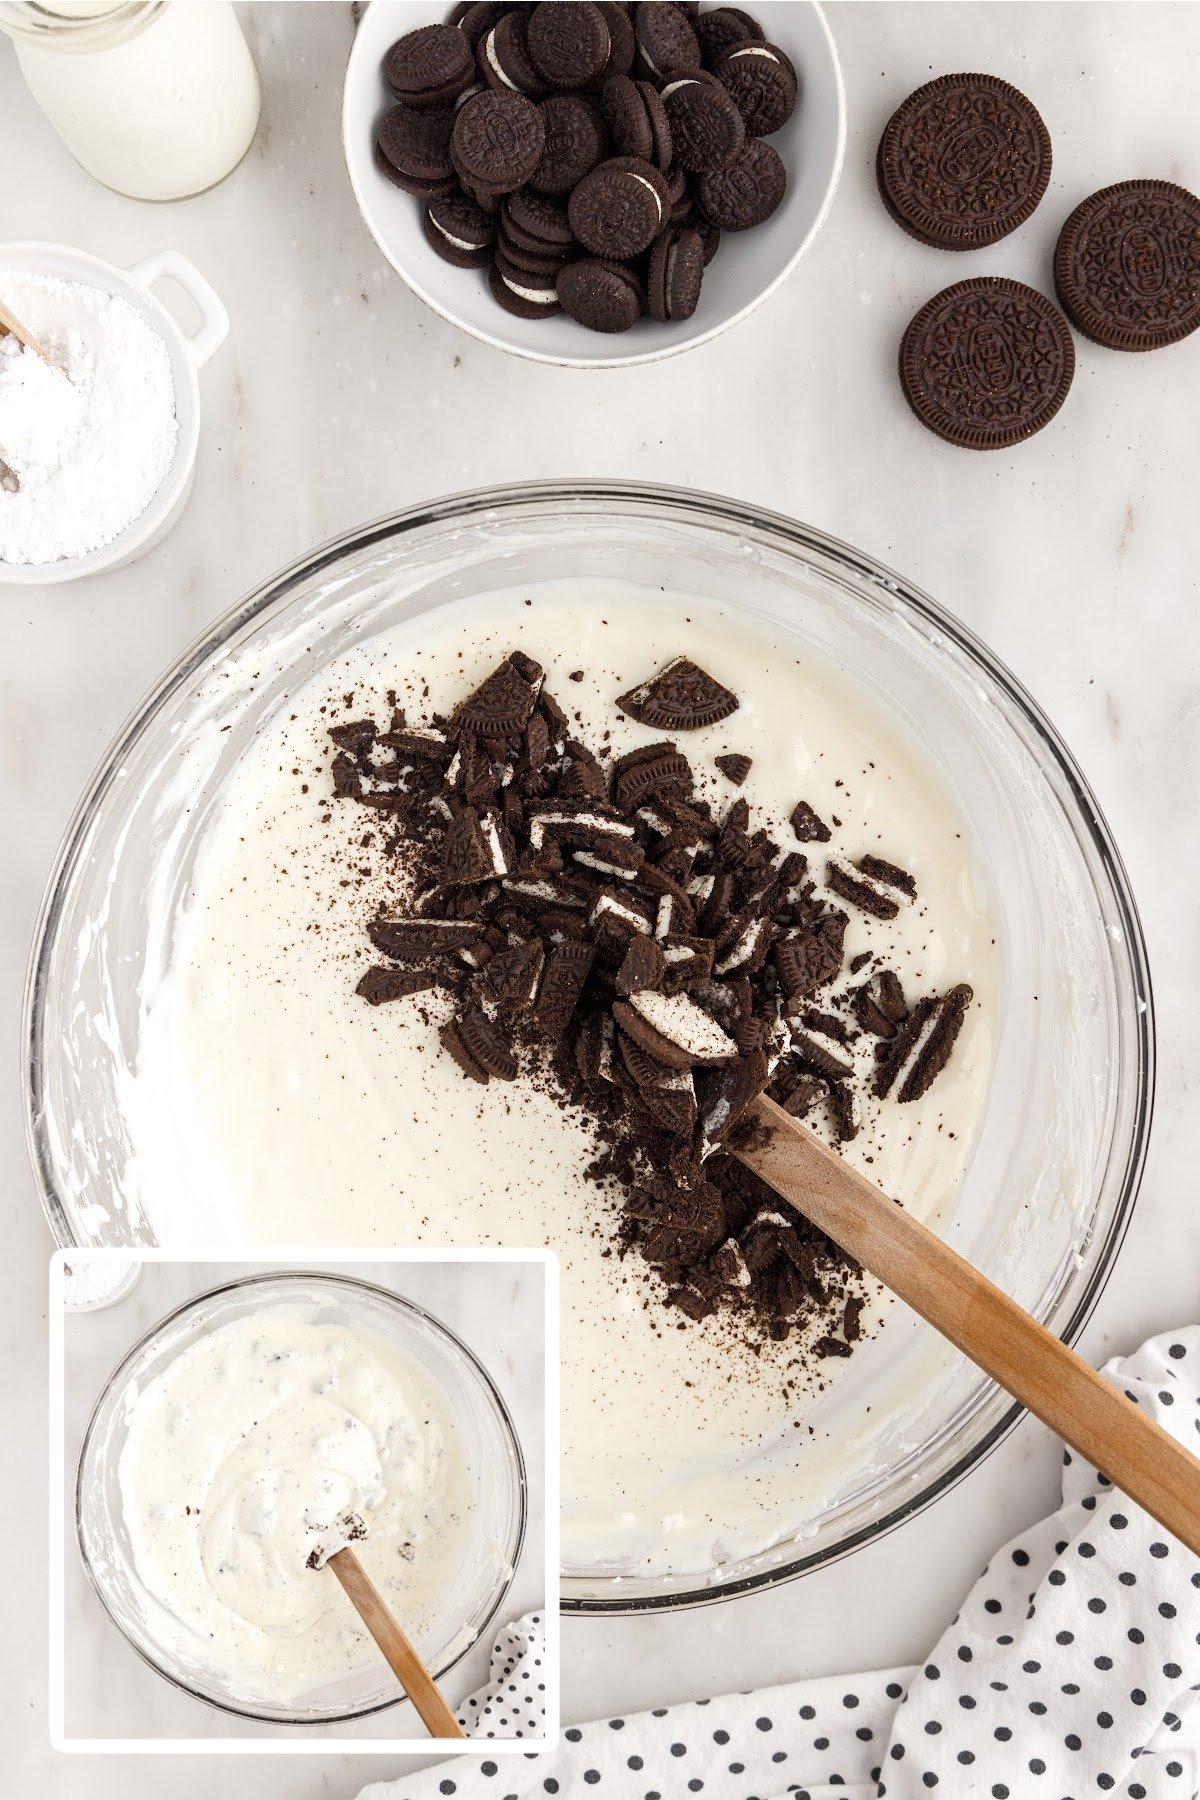 Oreo crumbs added to the top of the mixture and a mixing bowl with the cream cheese mixture with the oreos mixed in.